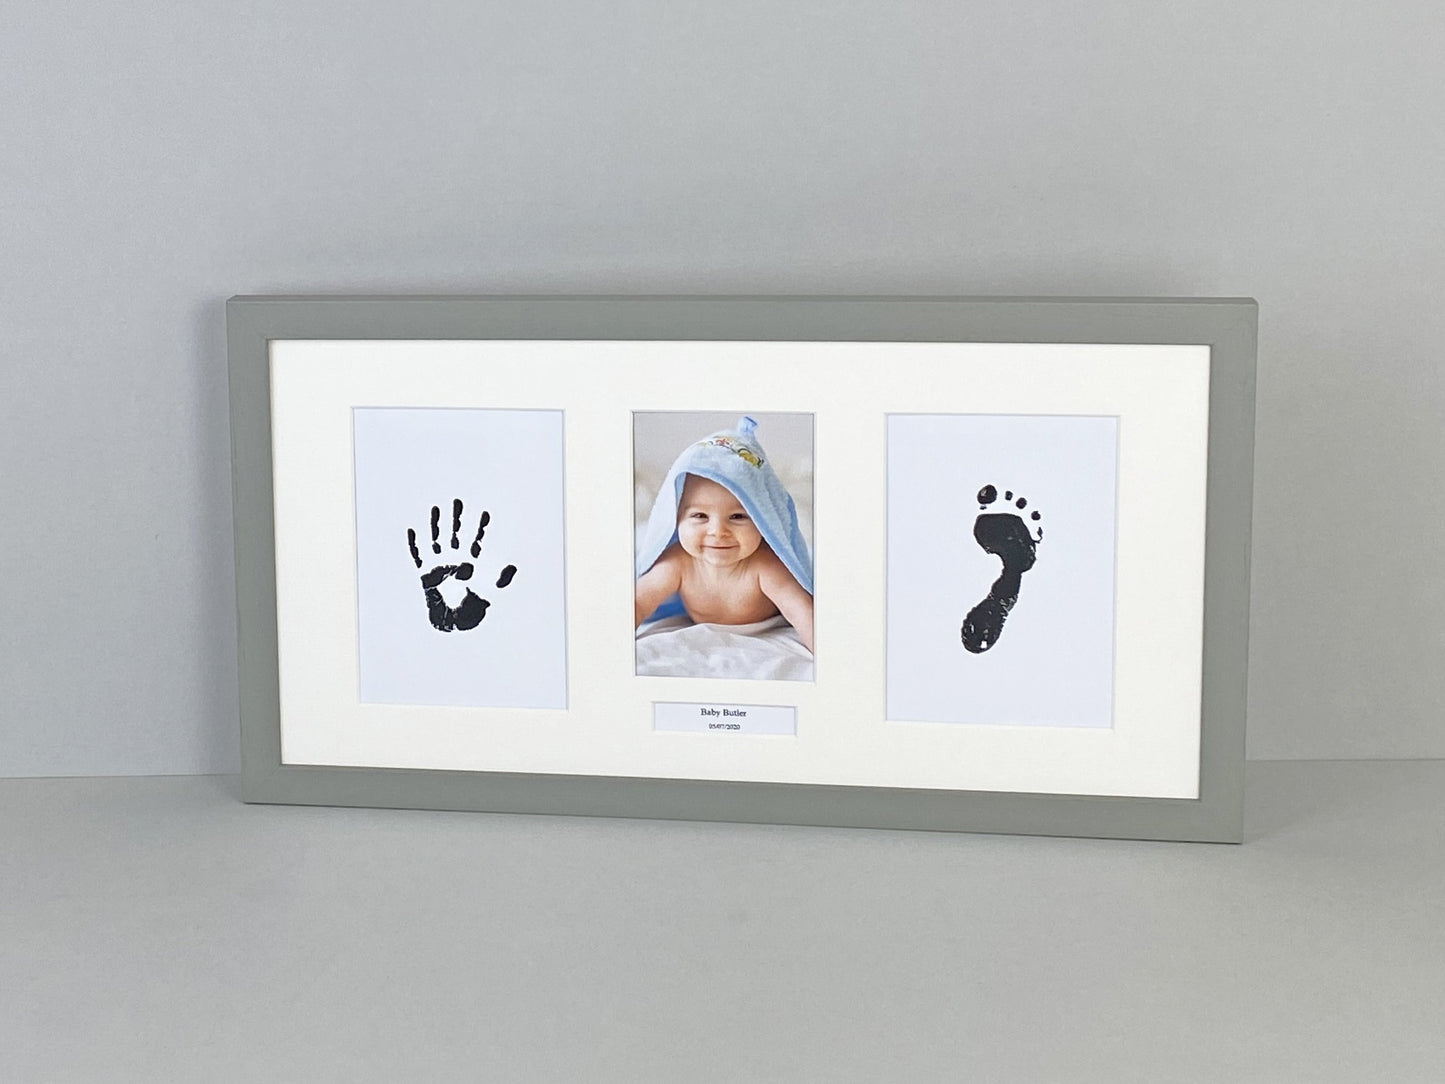 Capture The Memory Frames. Handmade Photo Frame for Baby's Hand&Foot Prints, Inkless kit included. 25x50cm. A Perfect Gift for New Parents. - PhotoFramesandMore - Wooden Picture Frames